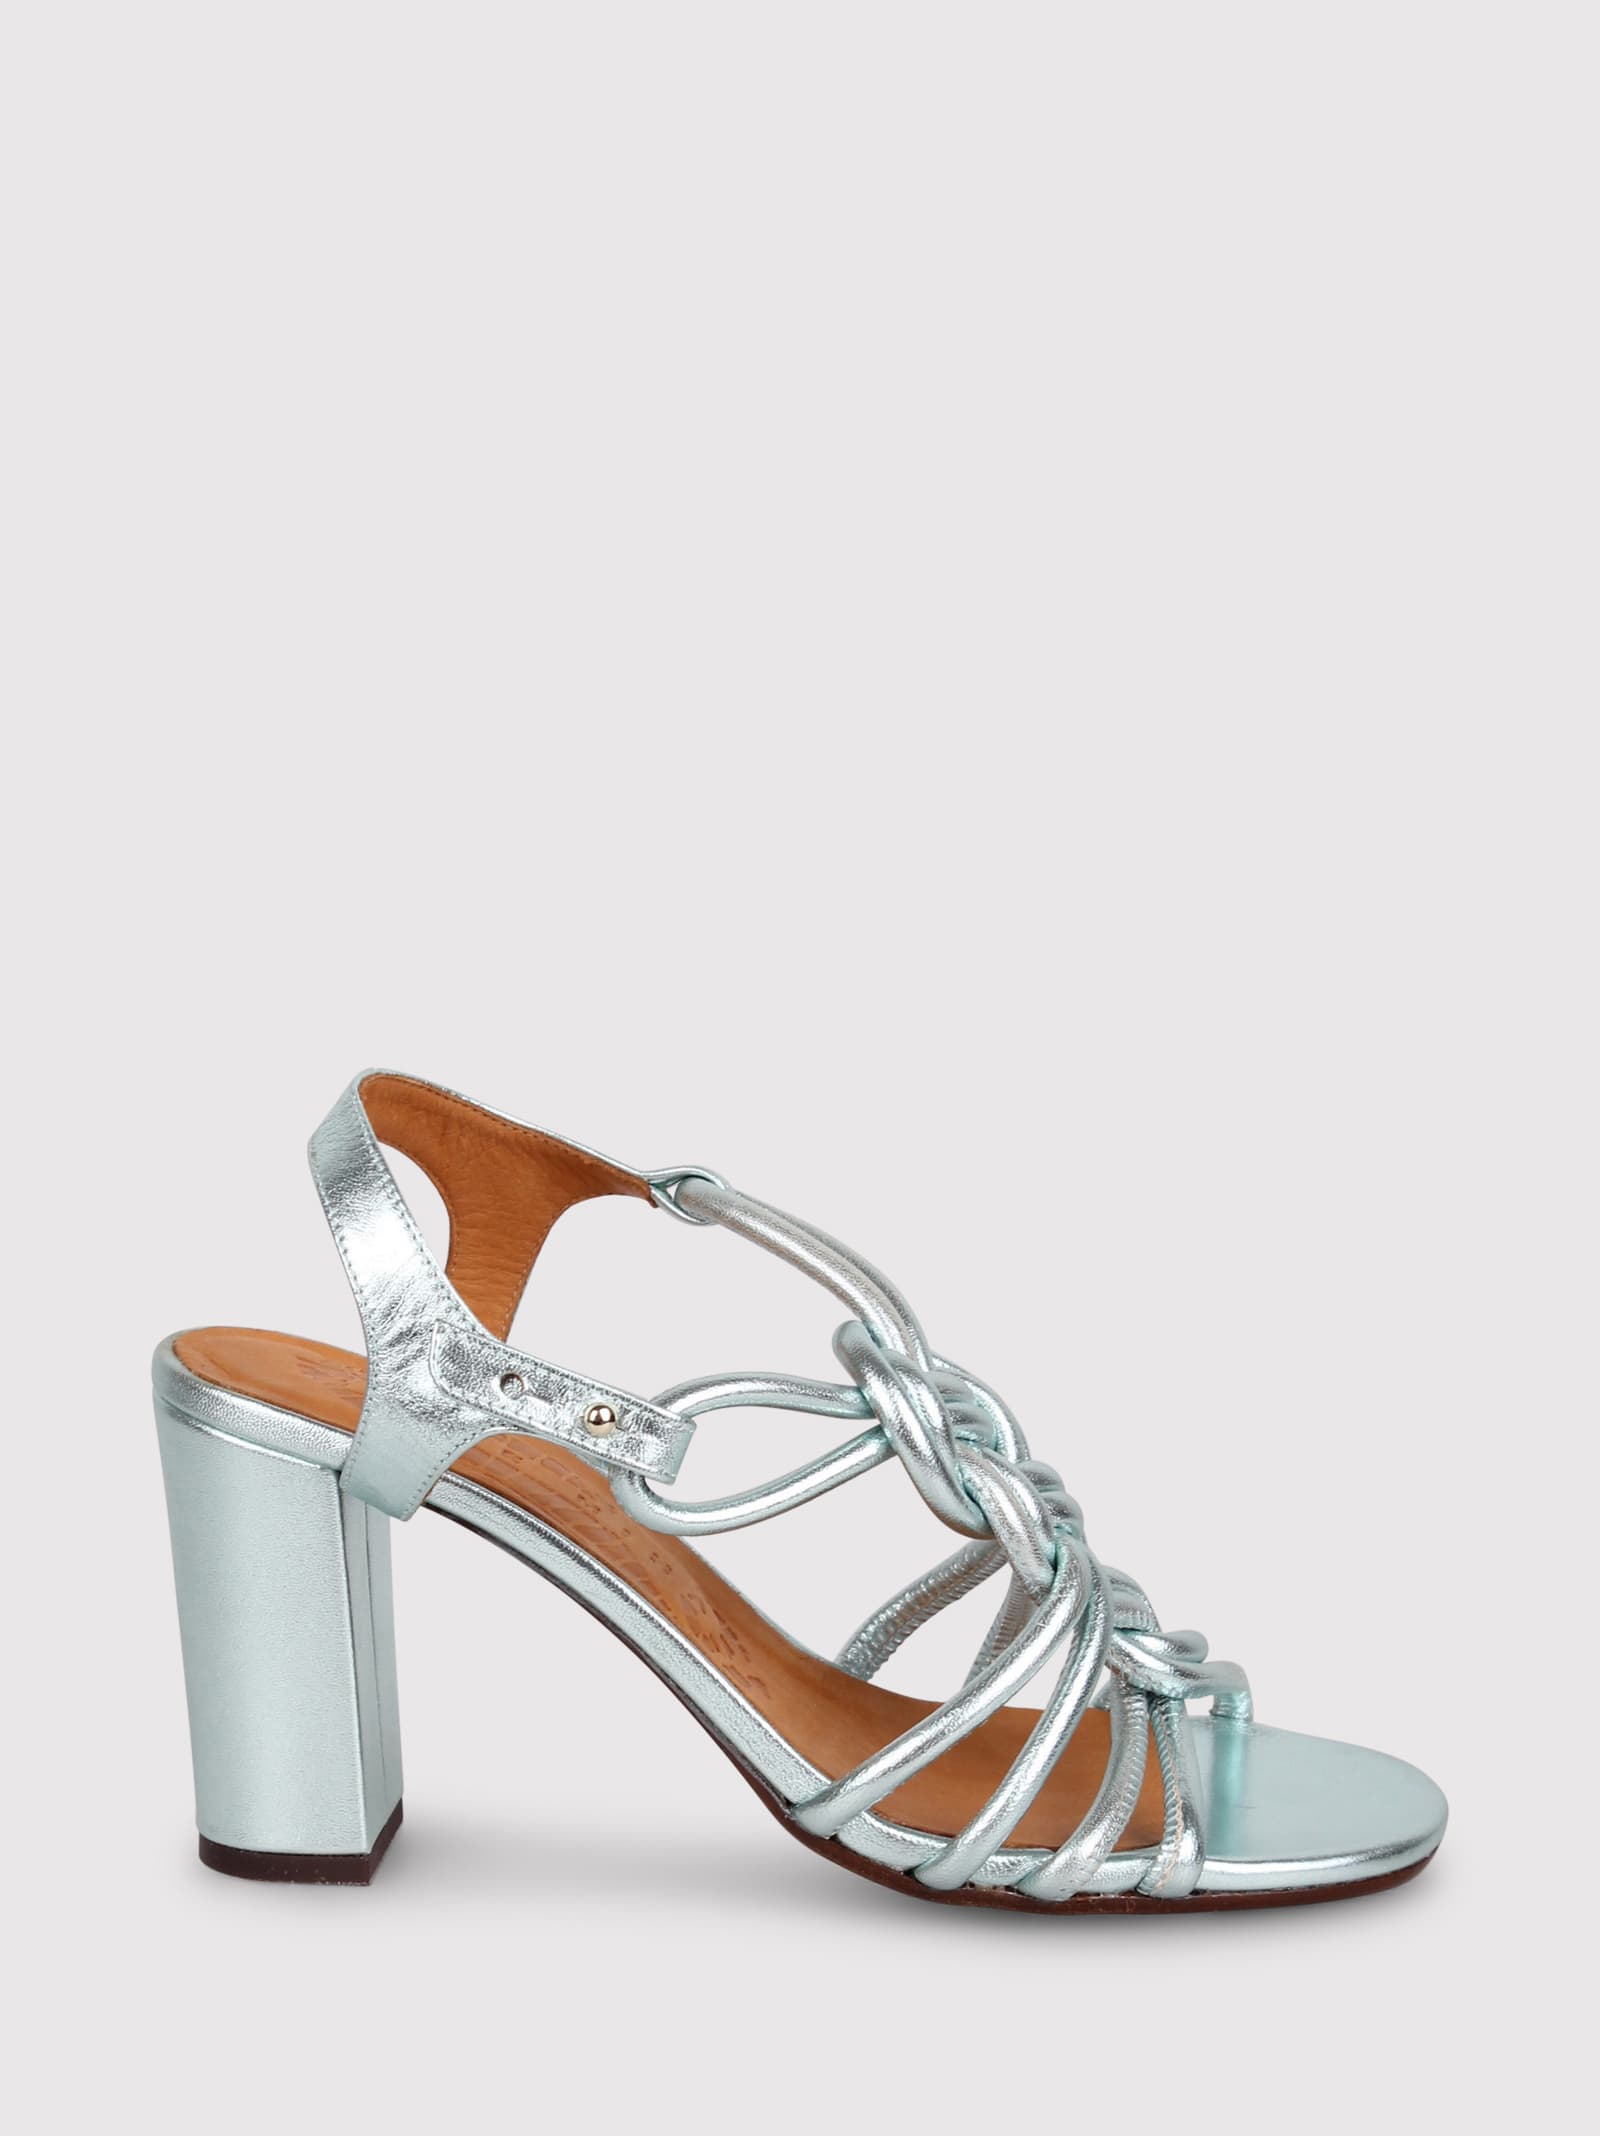 Chie Mihara Bane 85mm Leather Sandals In White